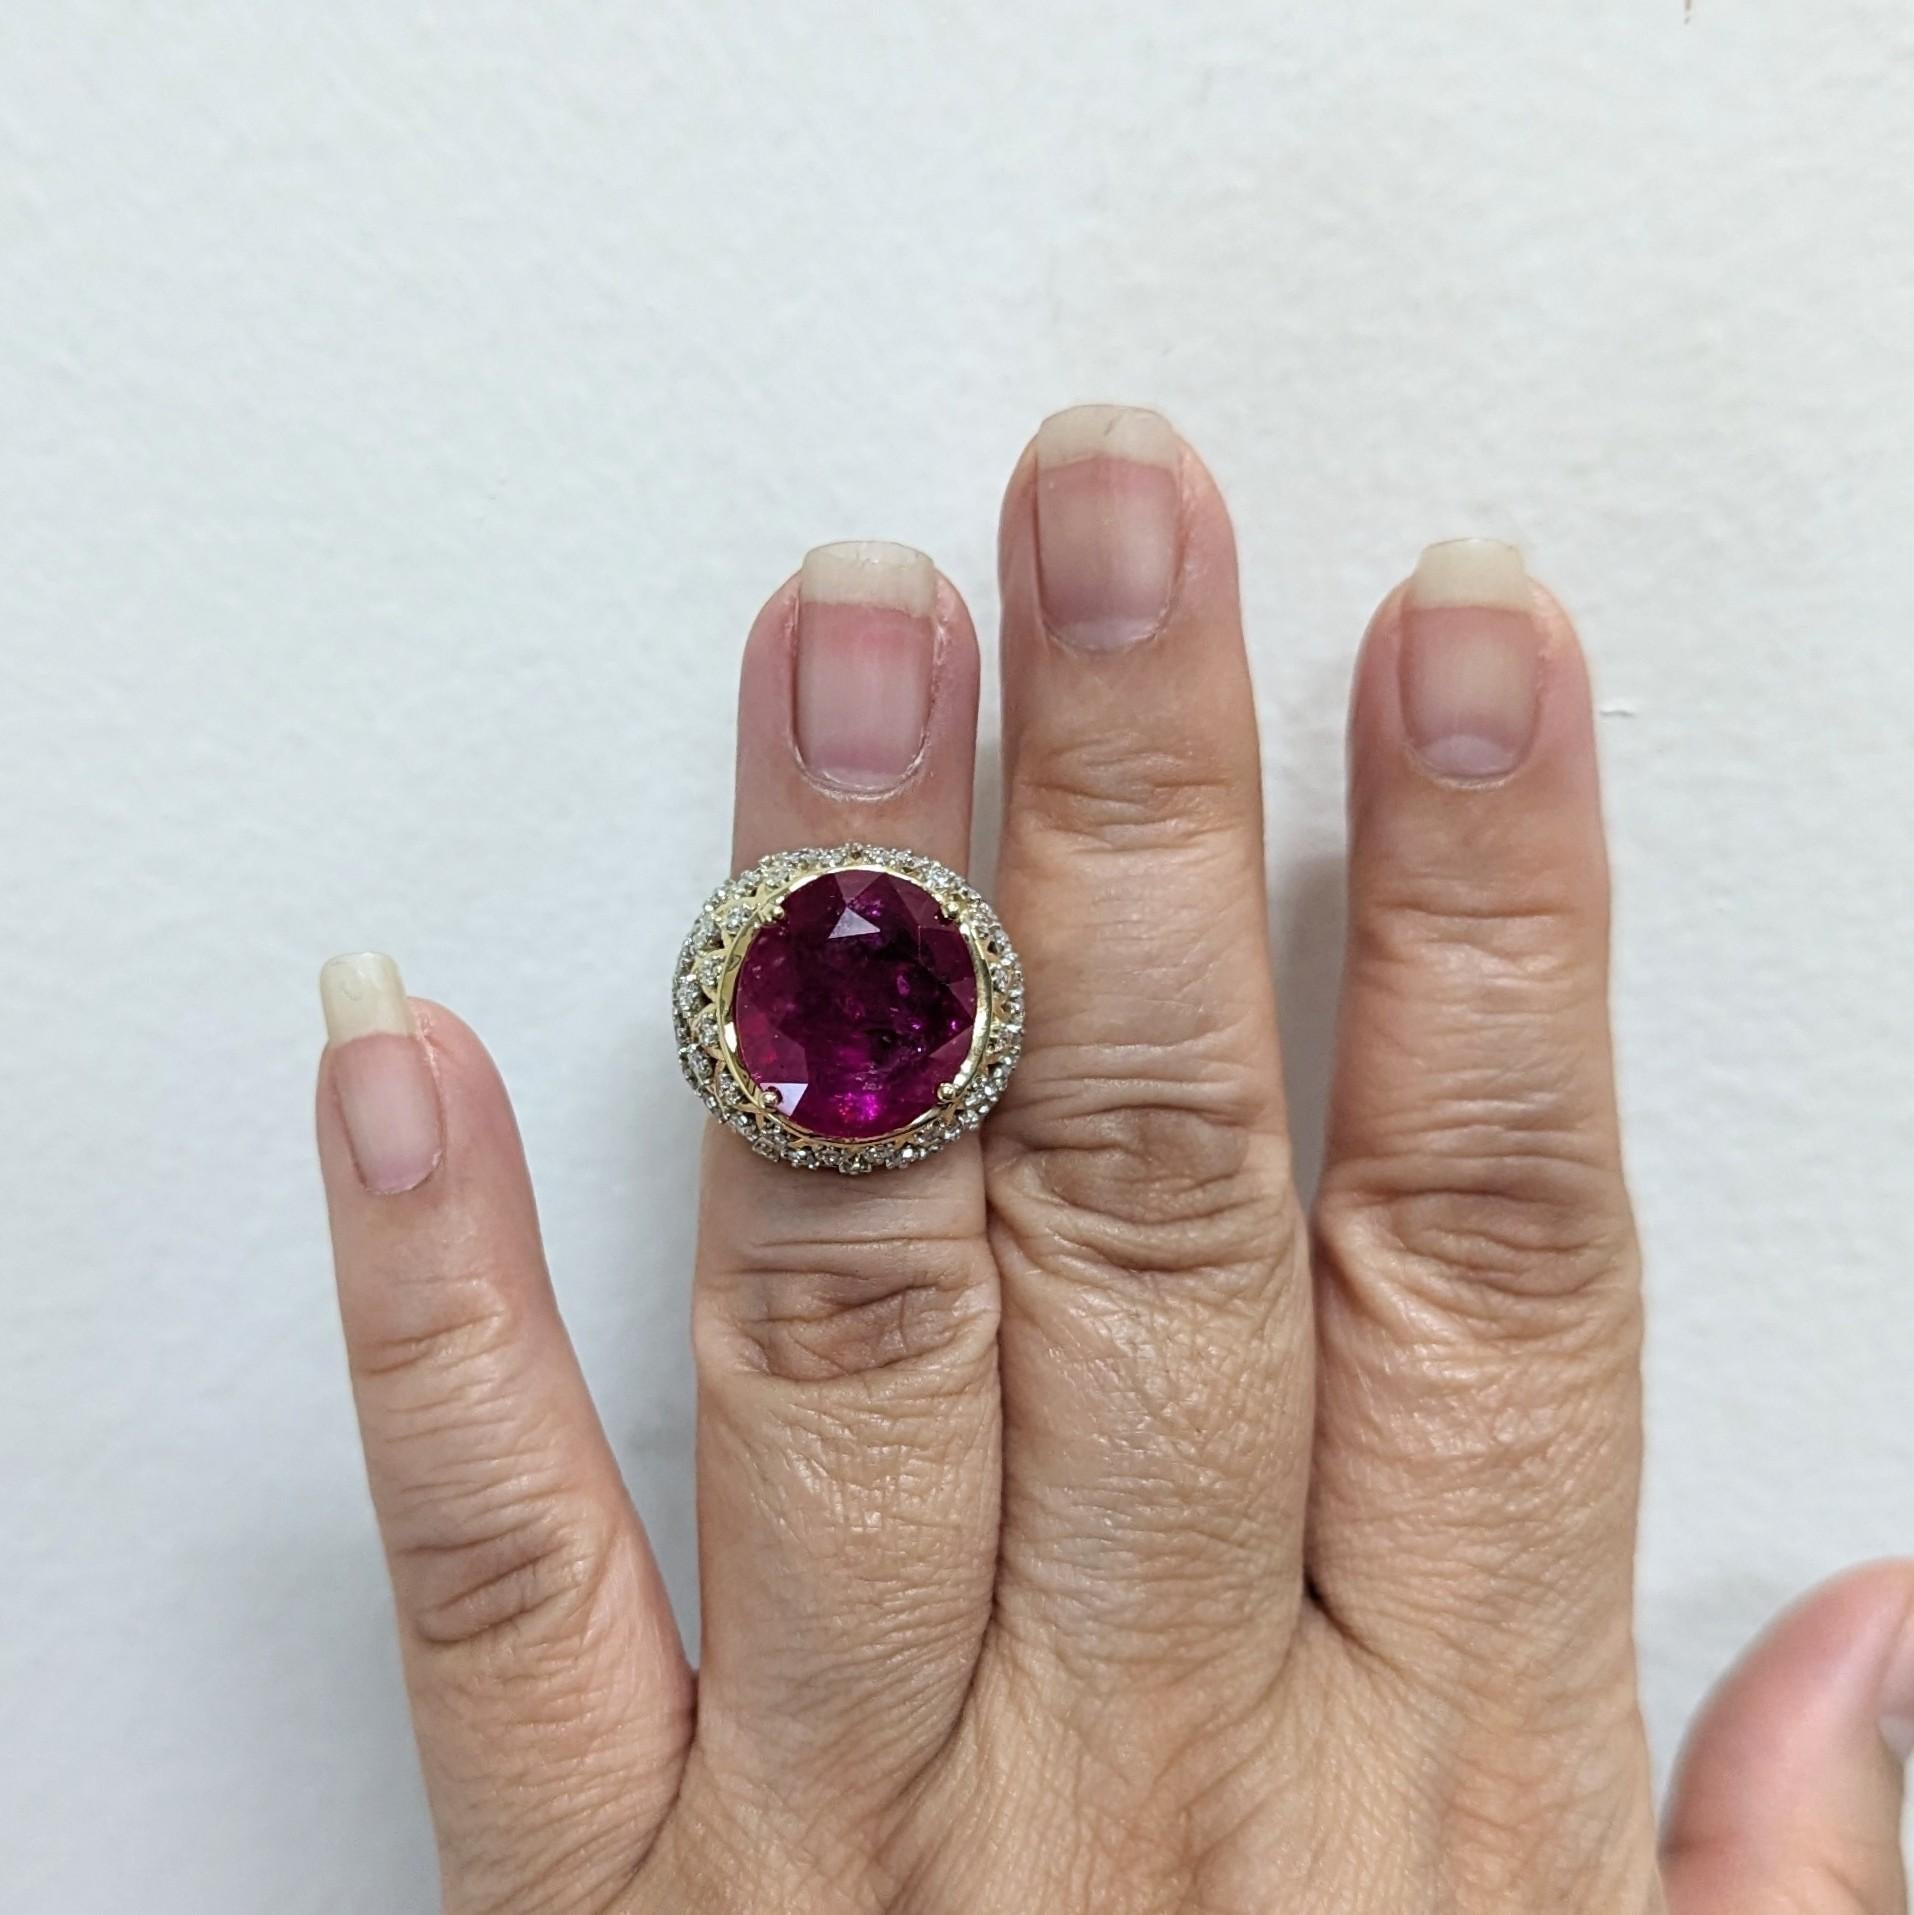 Gorgeous 16.41 ct. Mozambique ruby oval with good quality white diamond rounds.  Handmade in 18k yellow gold.  Ring size 4.25.  AGL certificate is included.